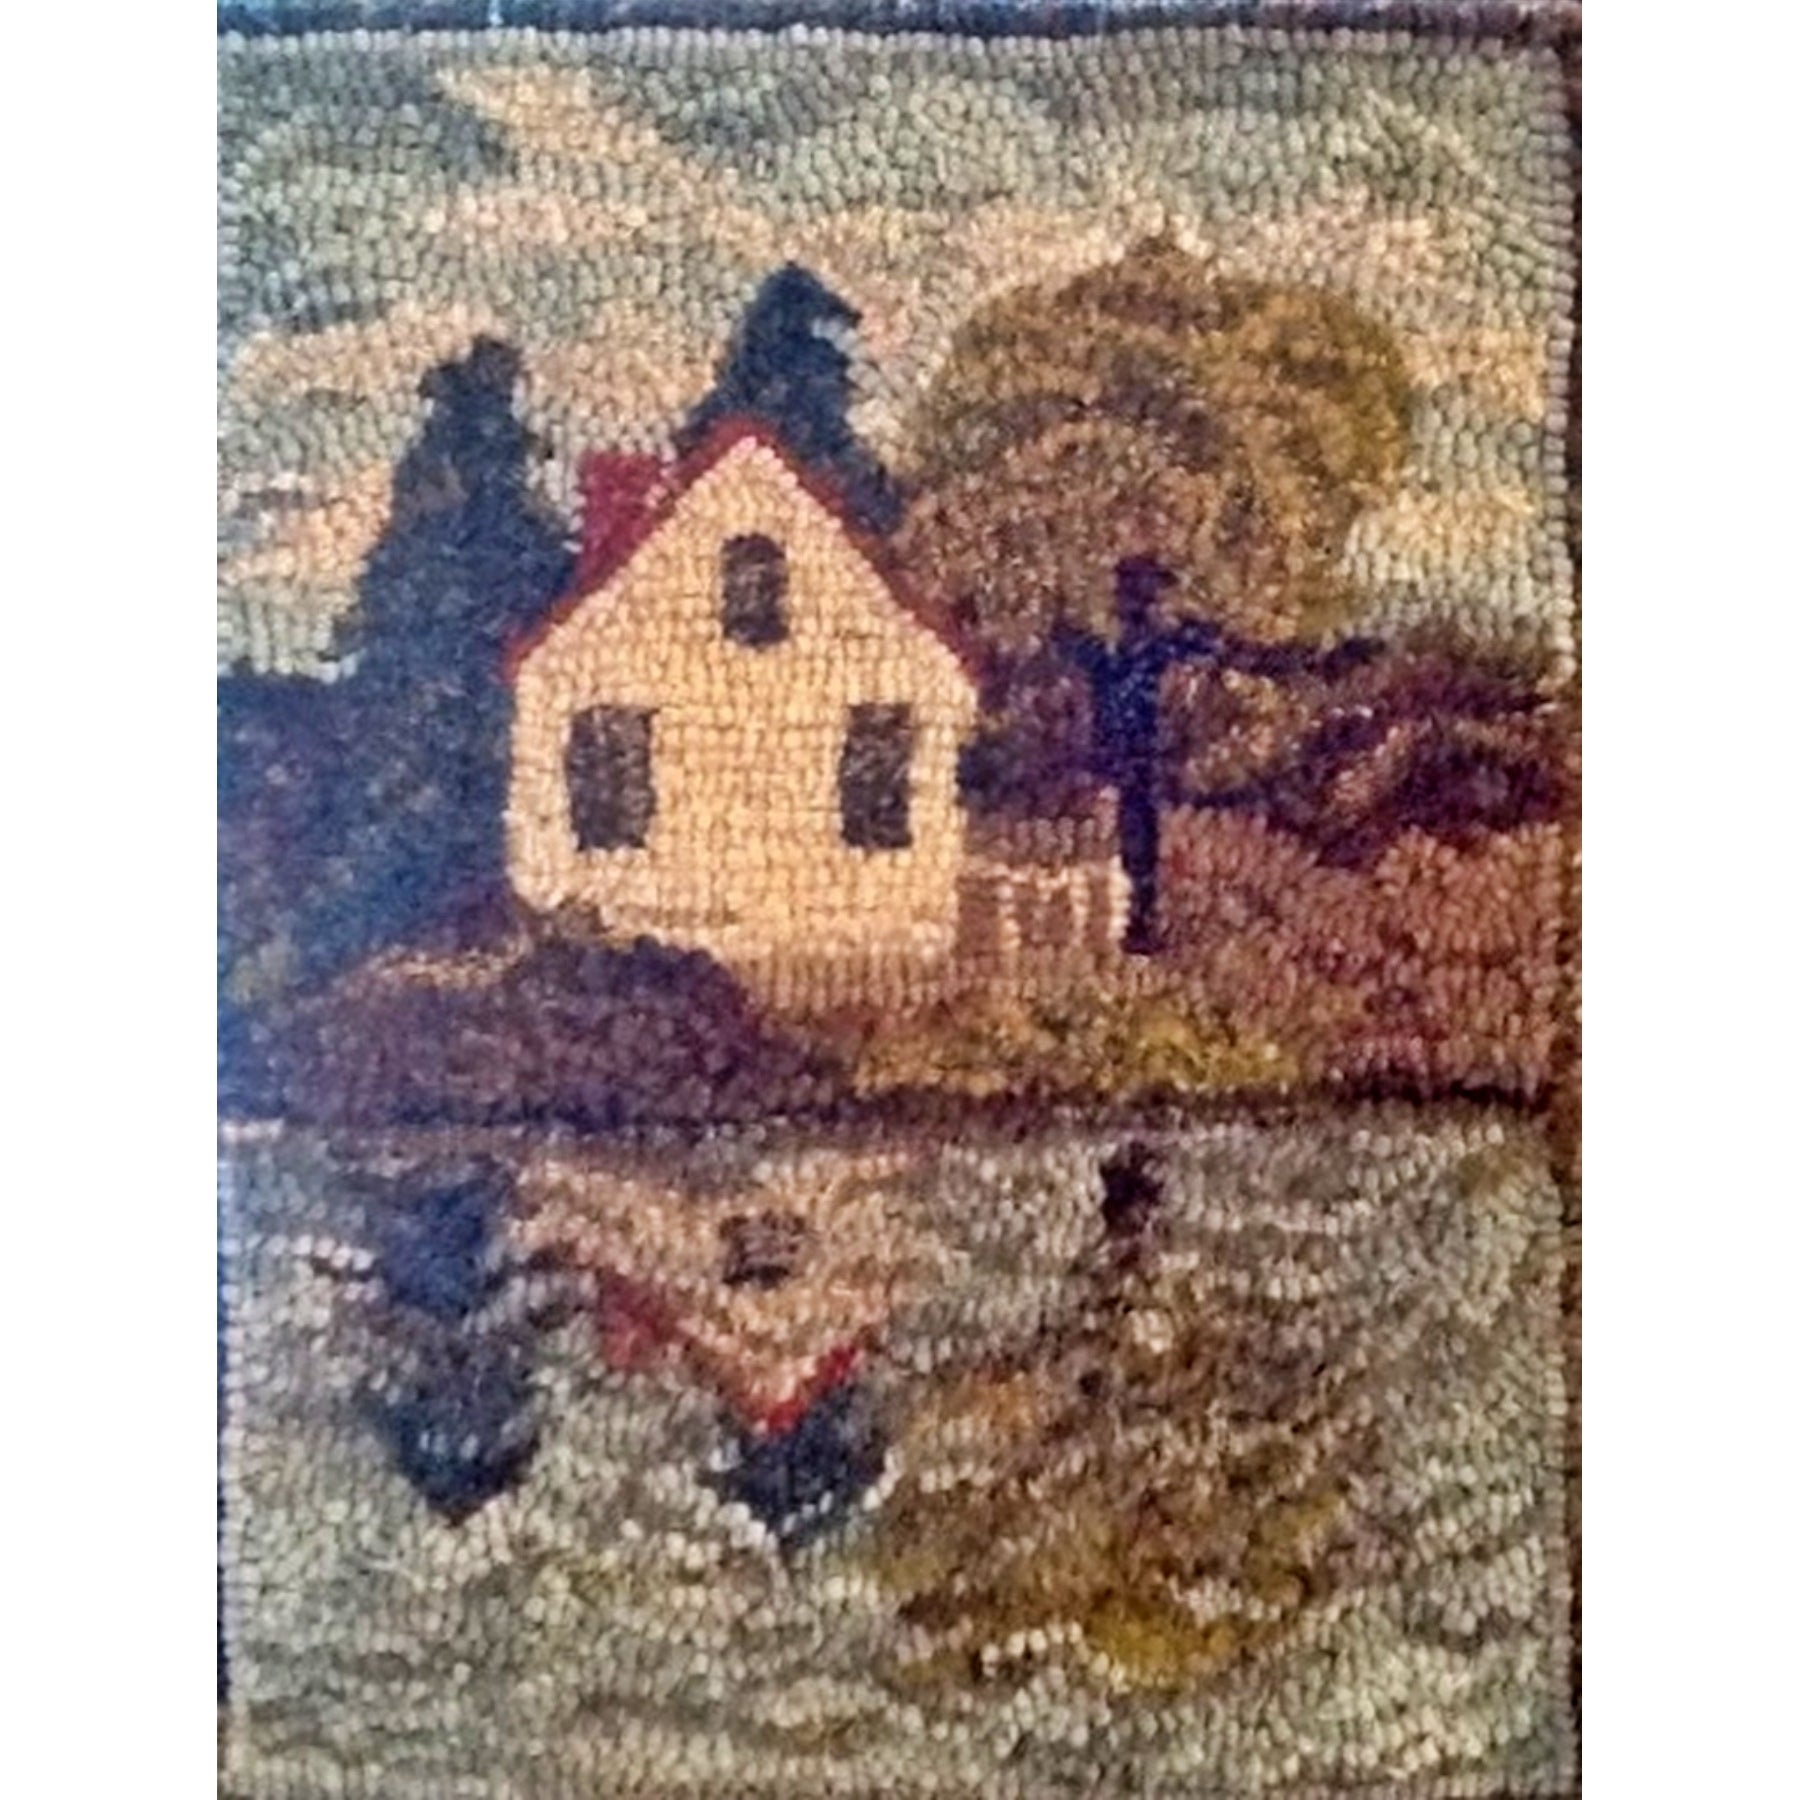 Daybreak, rug hooked by Tricia Travis